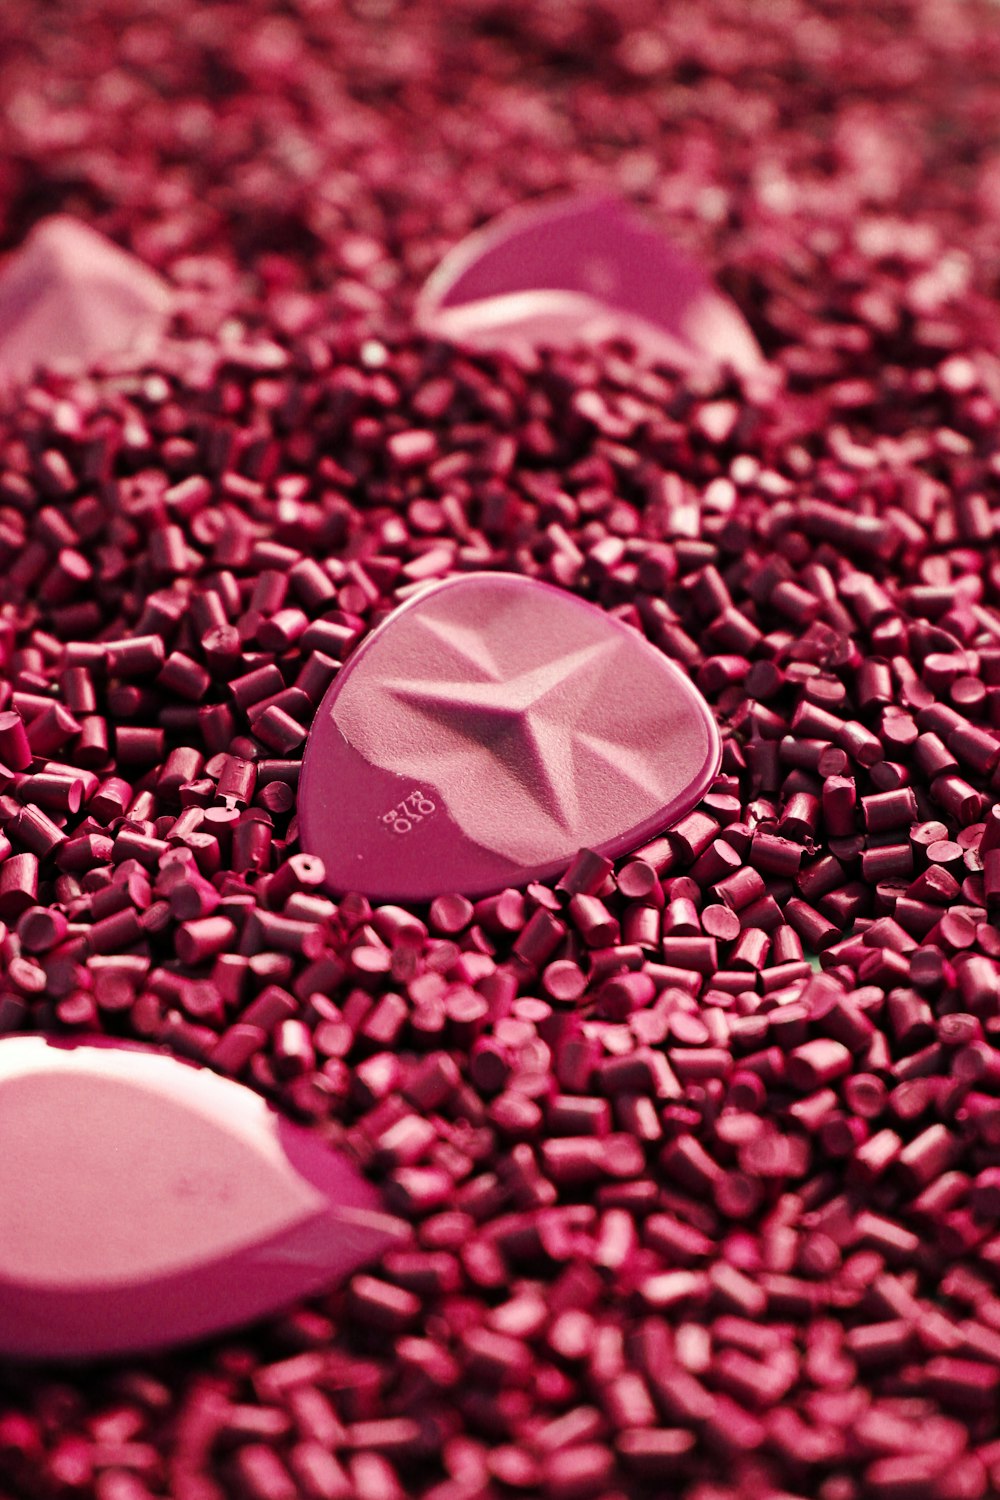 white and black heart on pink and white flower petals